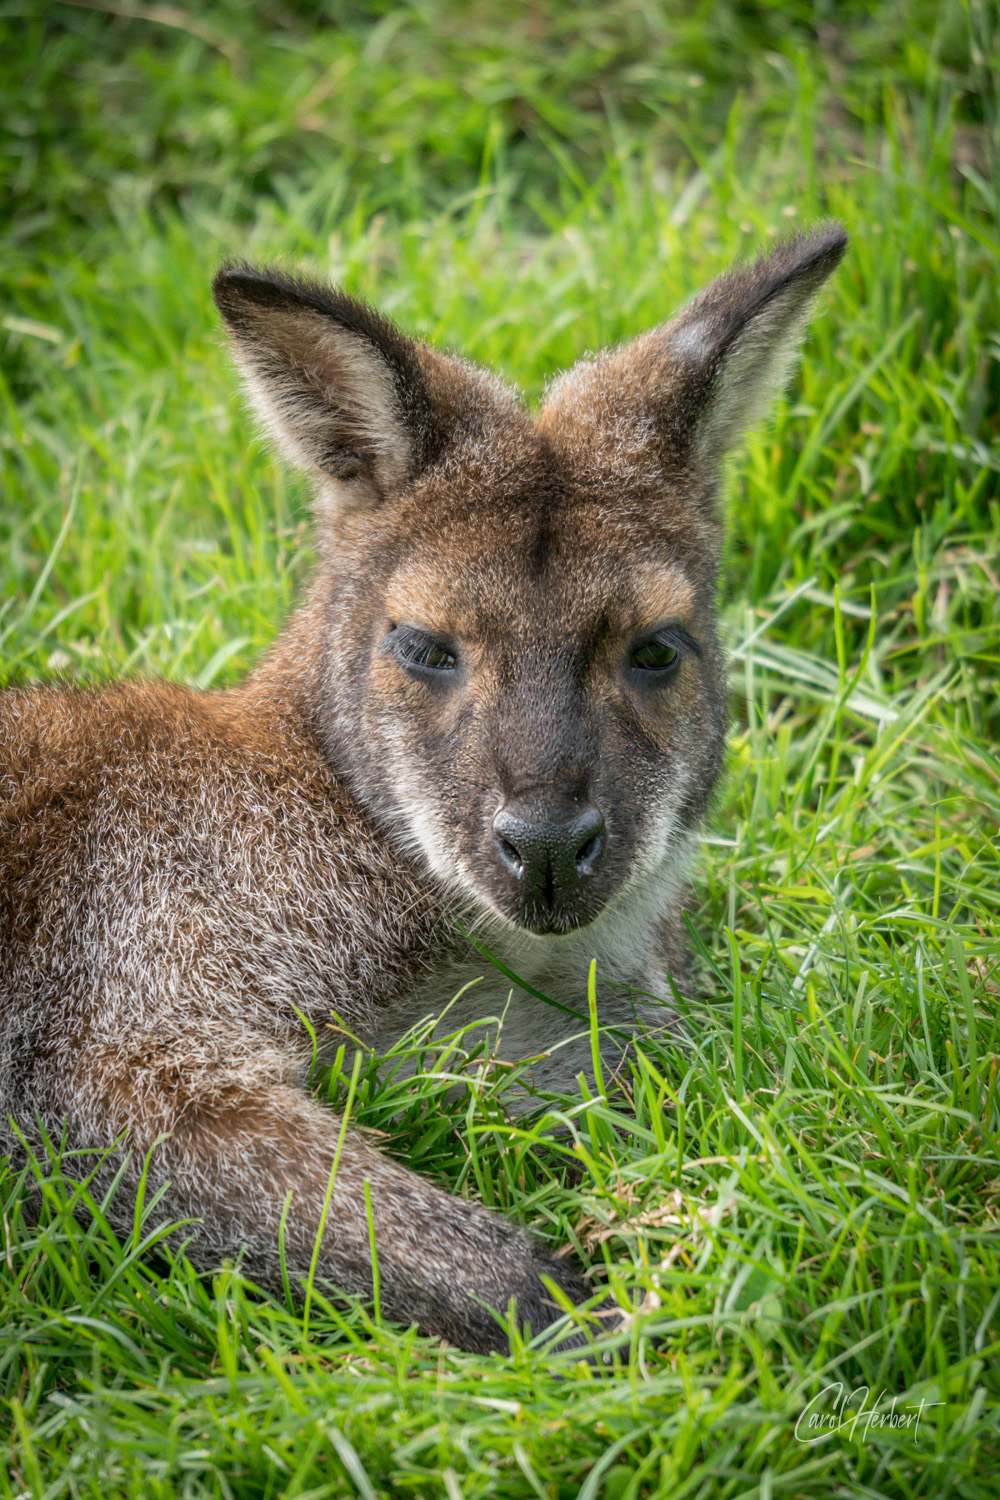 Photograph of a Wallaby